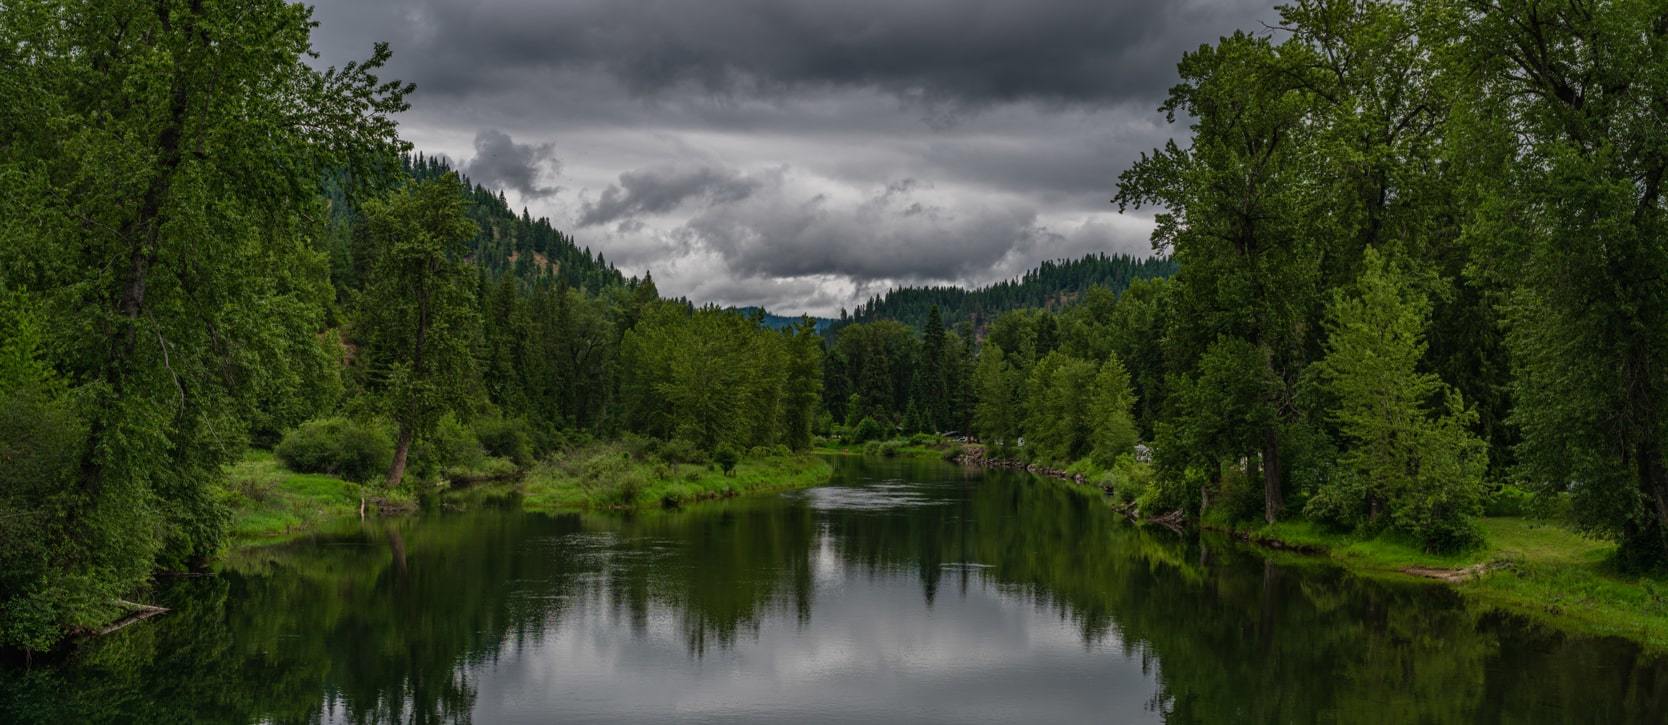 Harrison, Idaho lakefront surrounded by forestry on a cloudy, grey day